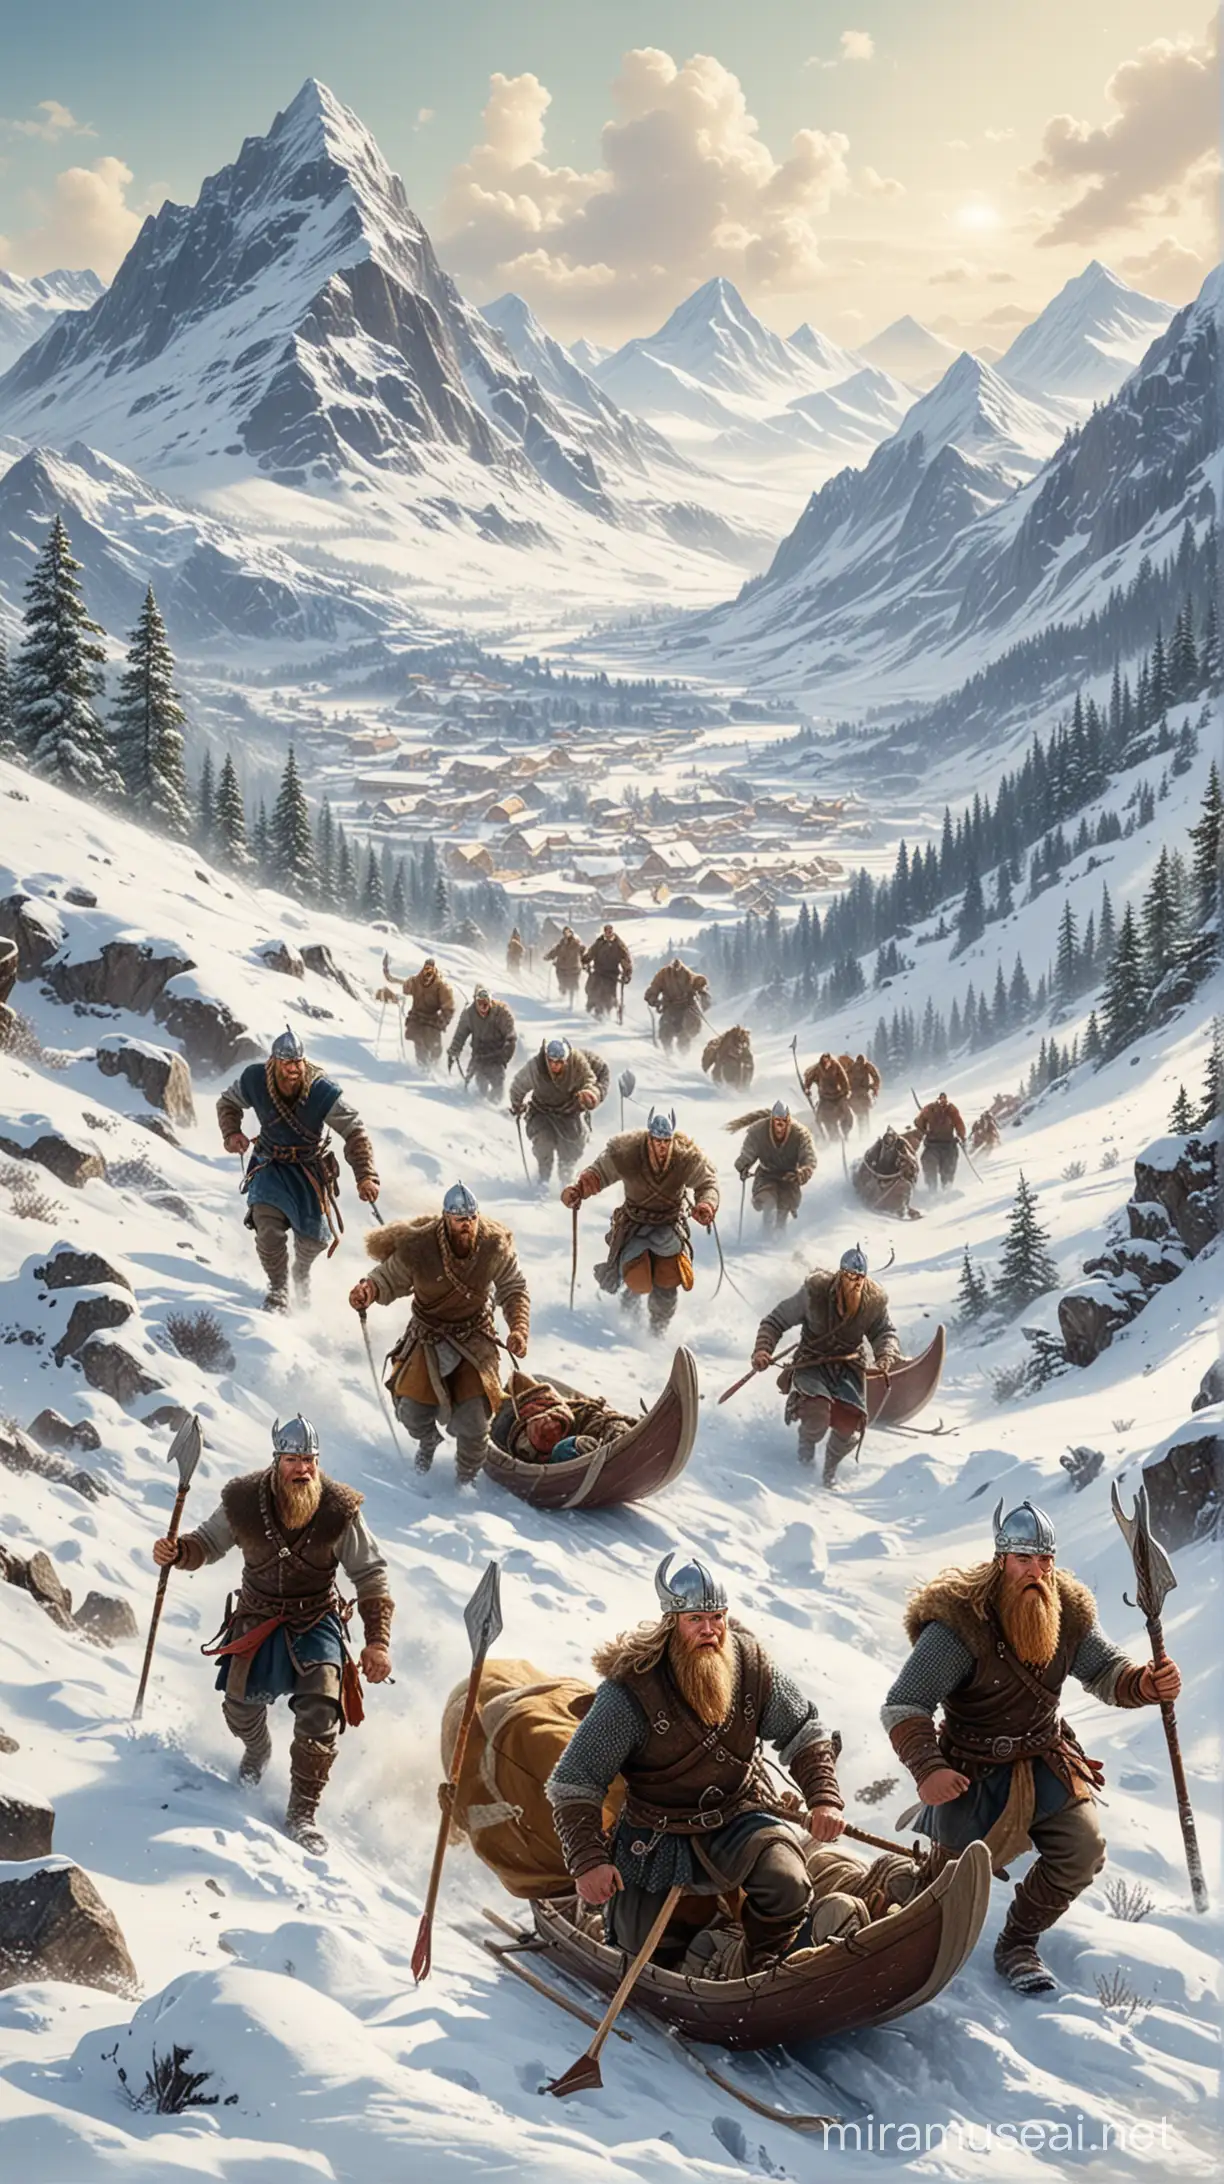 An illustration of Vikings skiing: On the slopes of a snow-covered mountain, Vikings are depicted skiing and enjoying themselves. A group of Vikings glides down the slopes with excitement while exploring the surrounding natural landscape, while others travel on sleds carrying their belongings.

